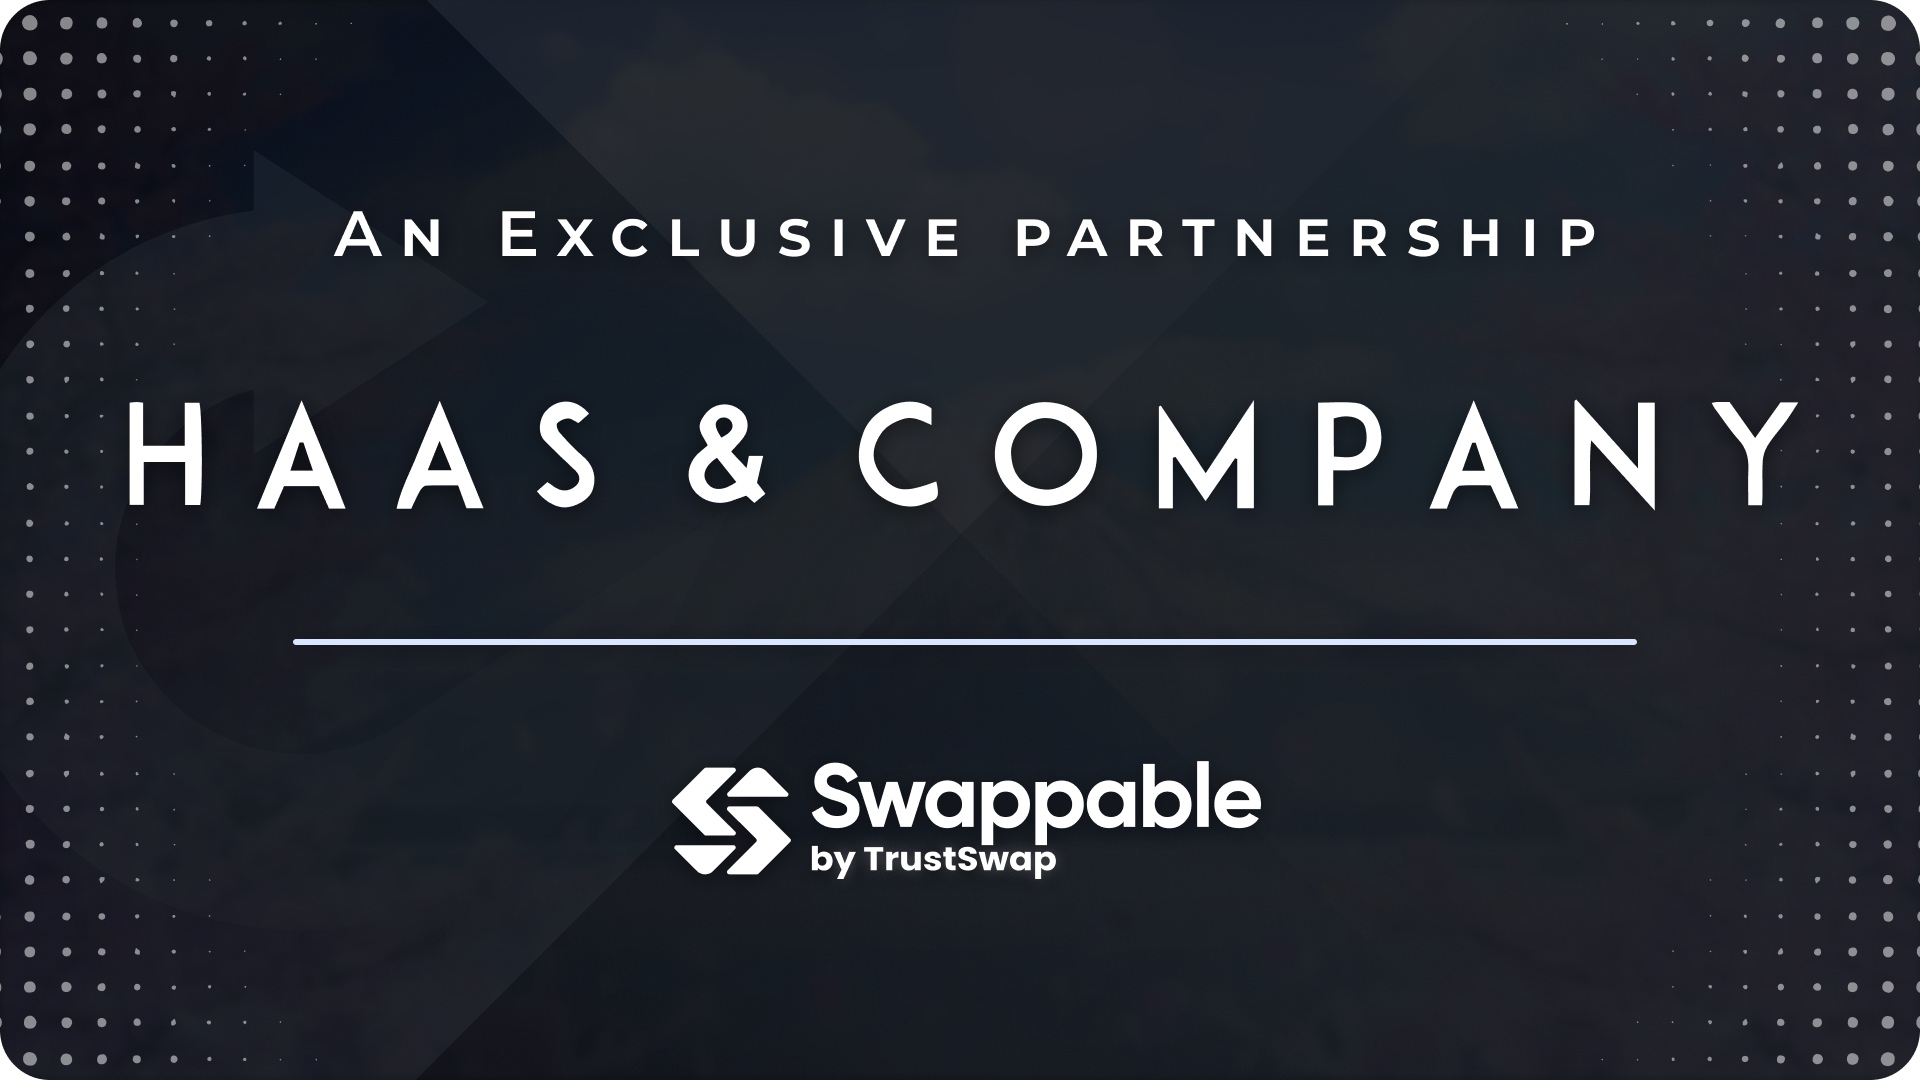 7 Days of Announcements – Day 6: Swappable and Haas & Company collaborate to take NFT artwork to the next level